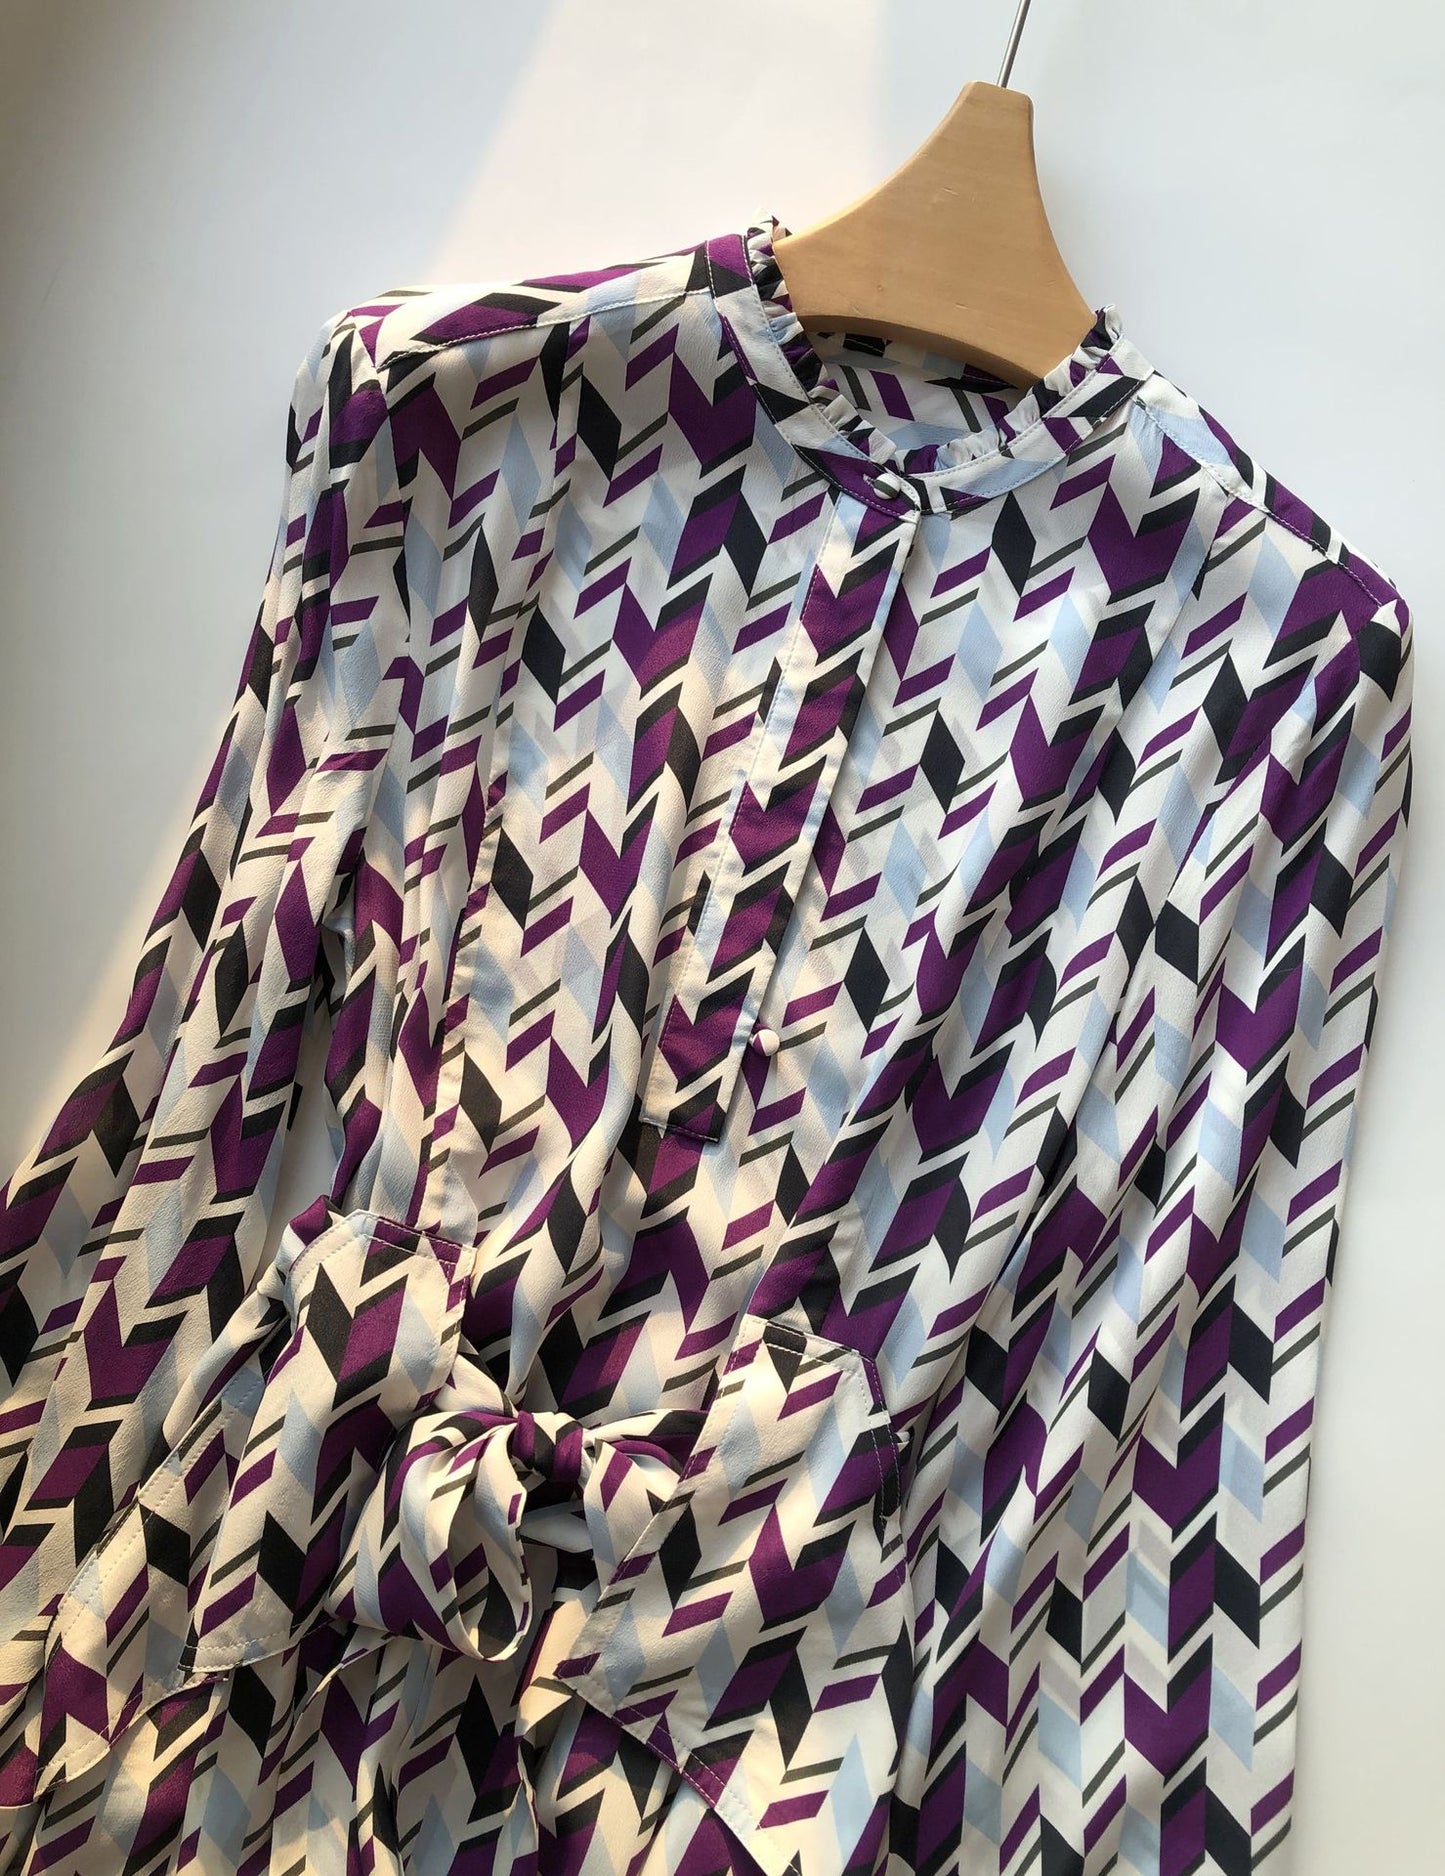 Retro Geometric Arrow Print Silk Dress Loose, Swingy, and Perfect for Spring/Summer